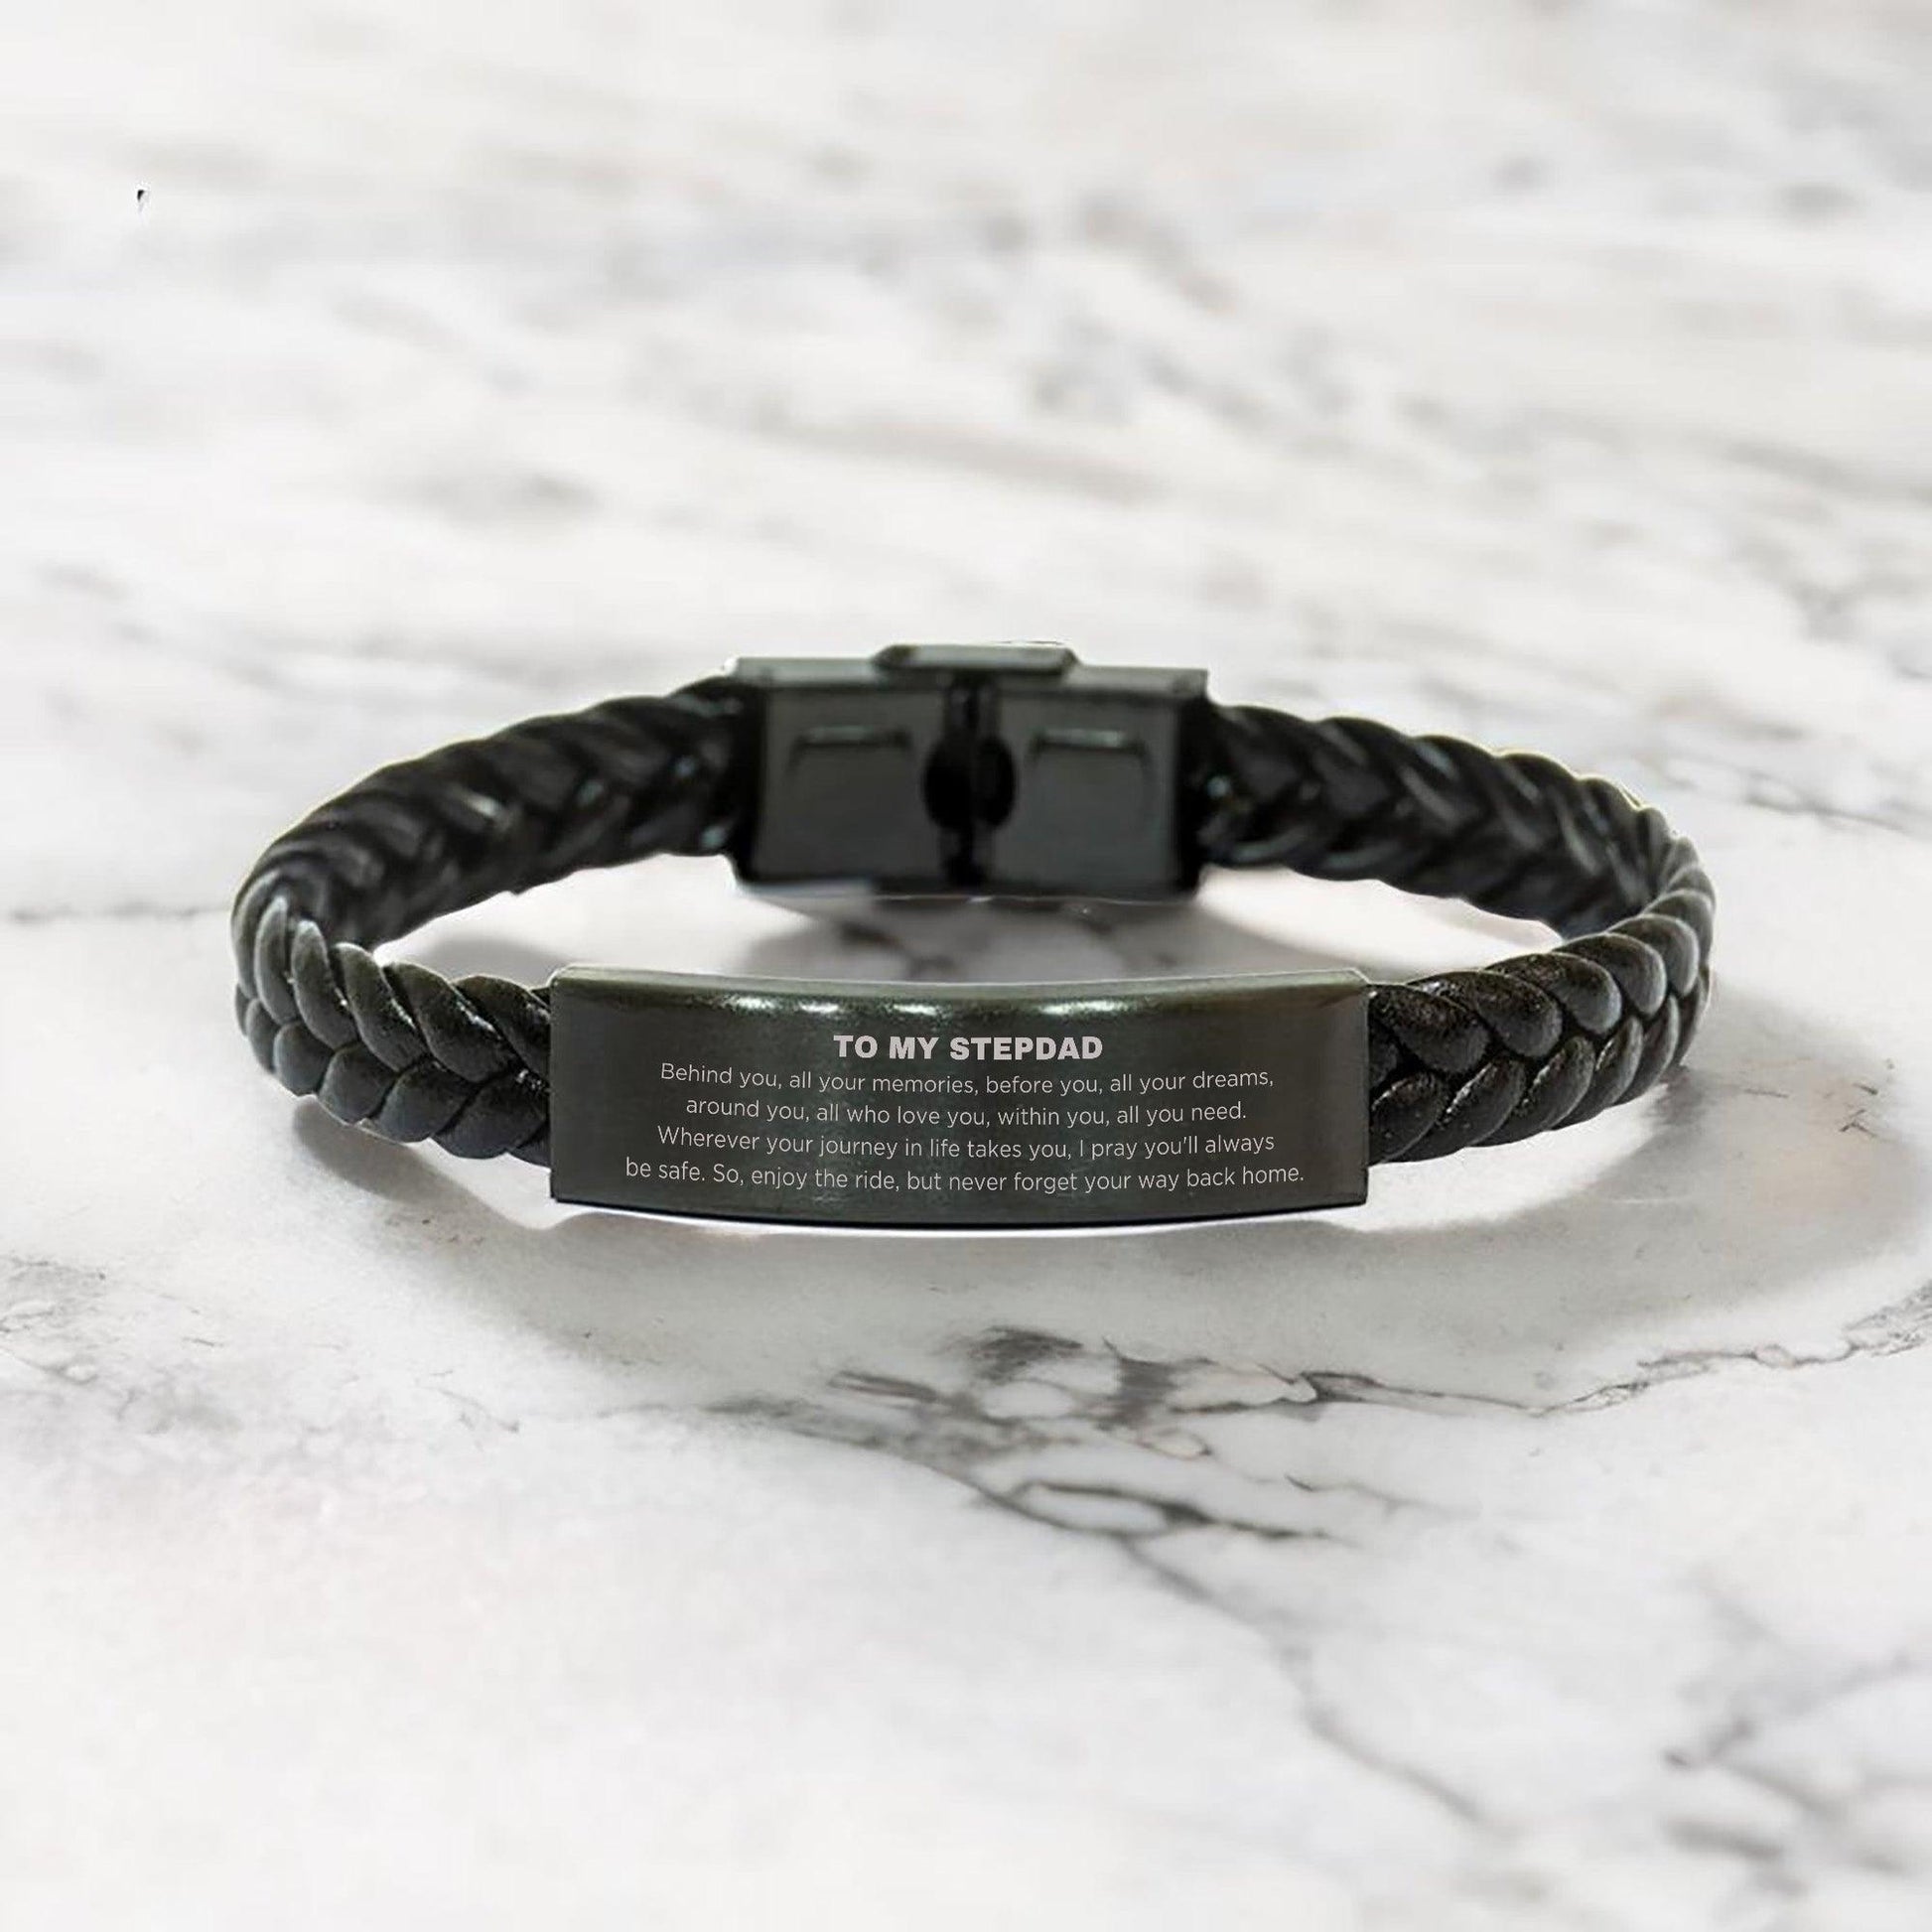 Stepdad Braided Leather Bracelet Birthday Christmas Unique Gifts Behind you, all your memories, before you, all your dreams - Mallard Moon Gift Shop